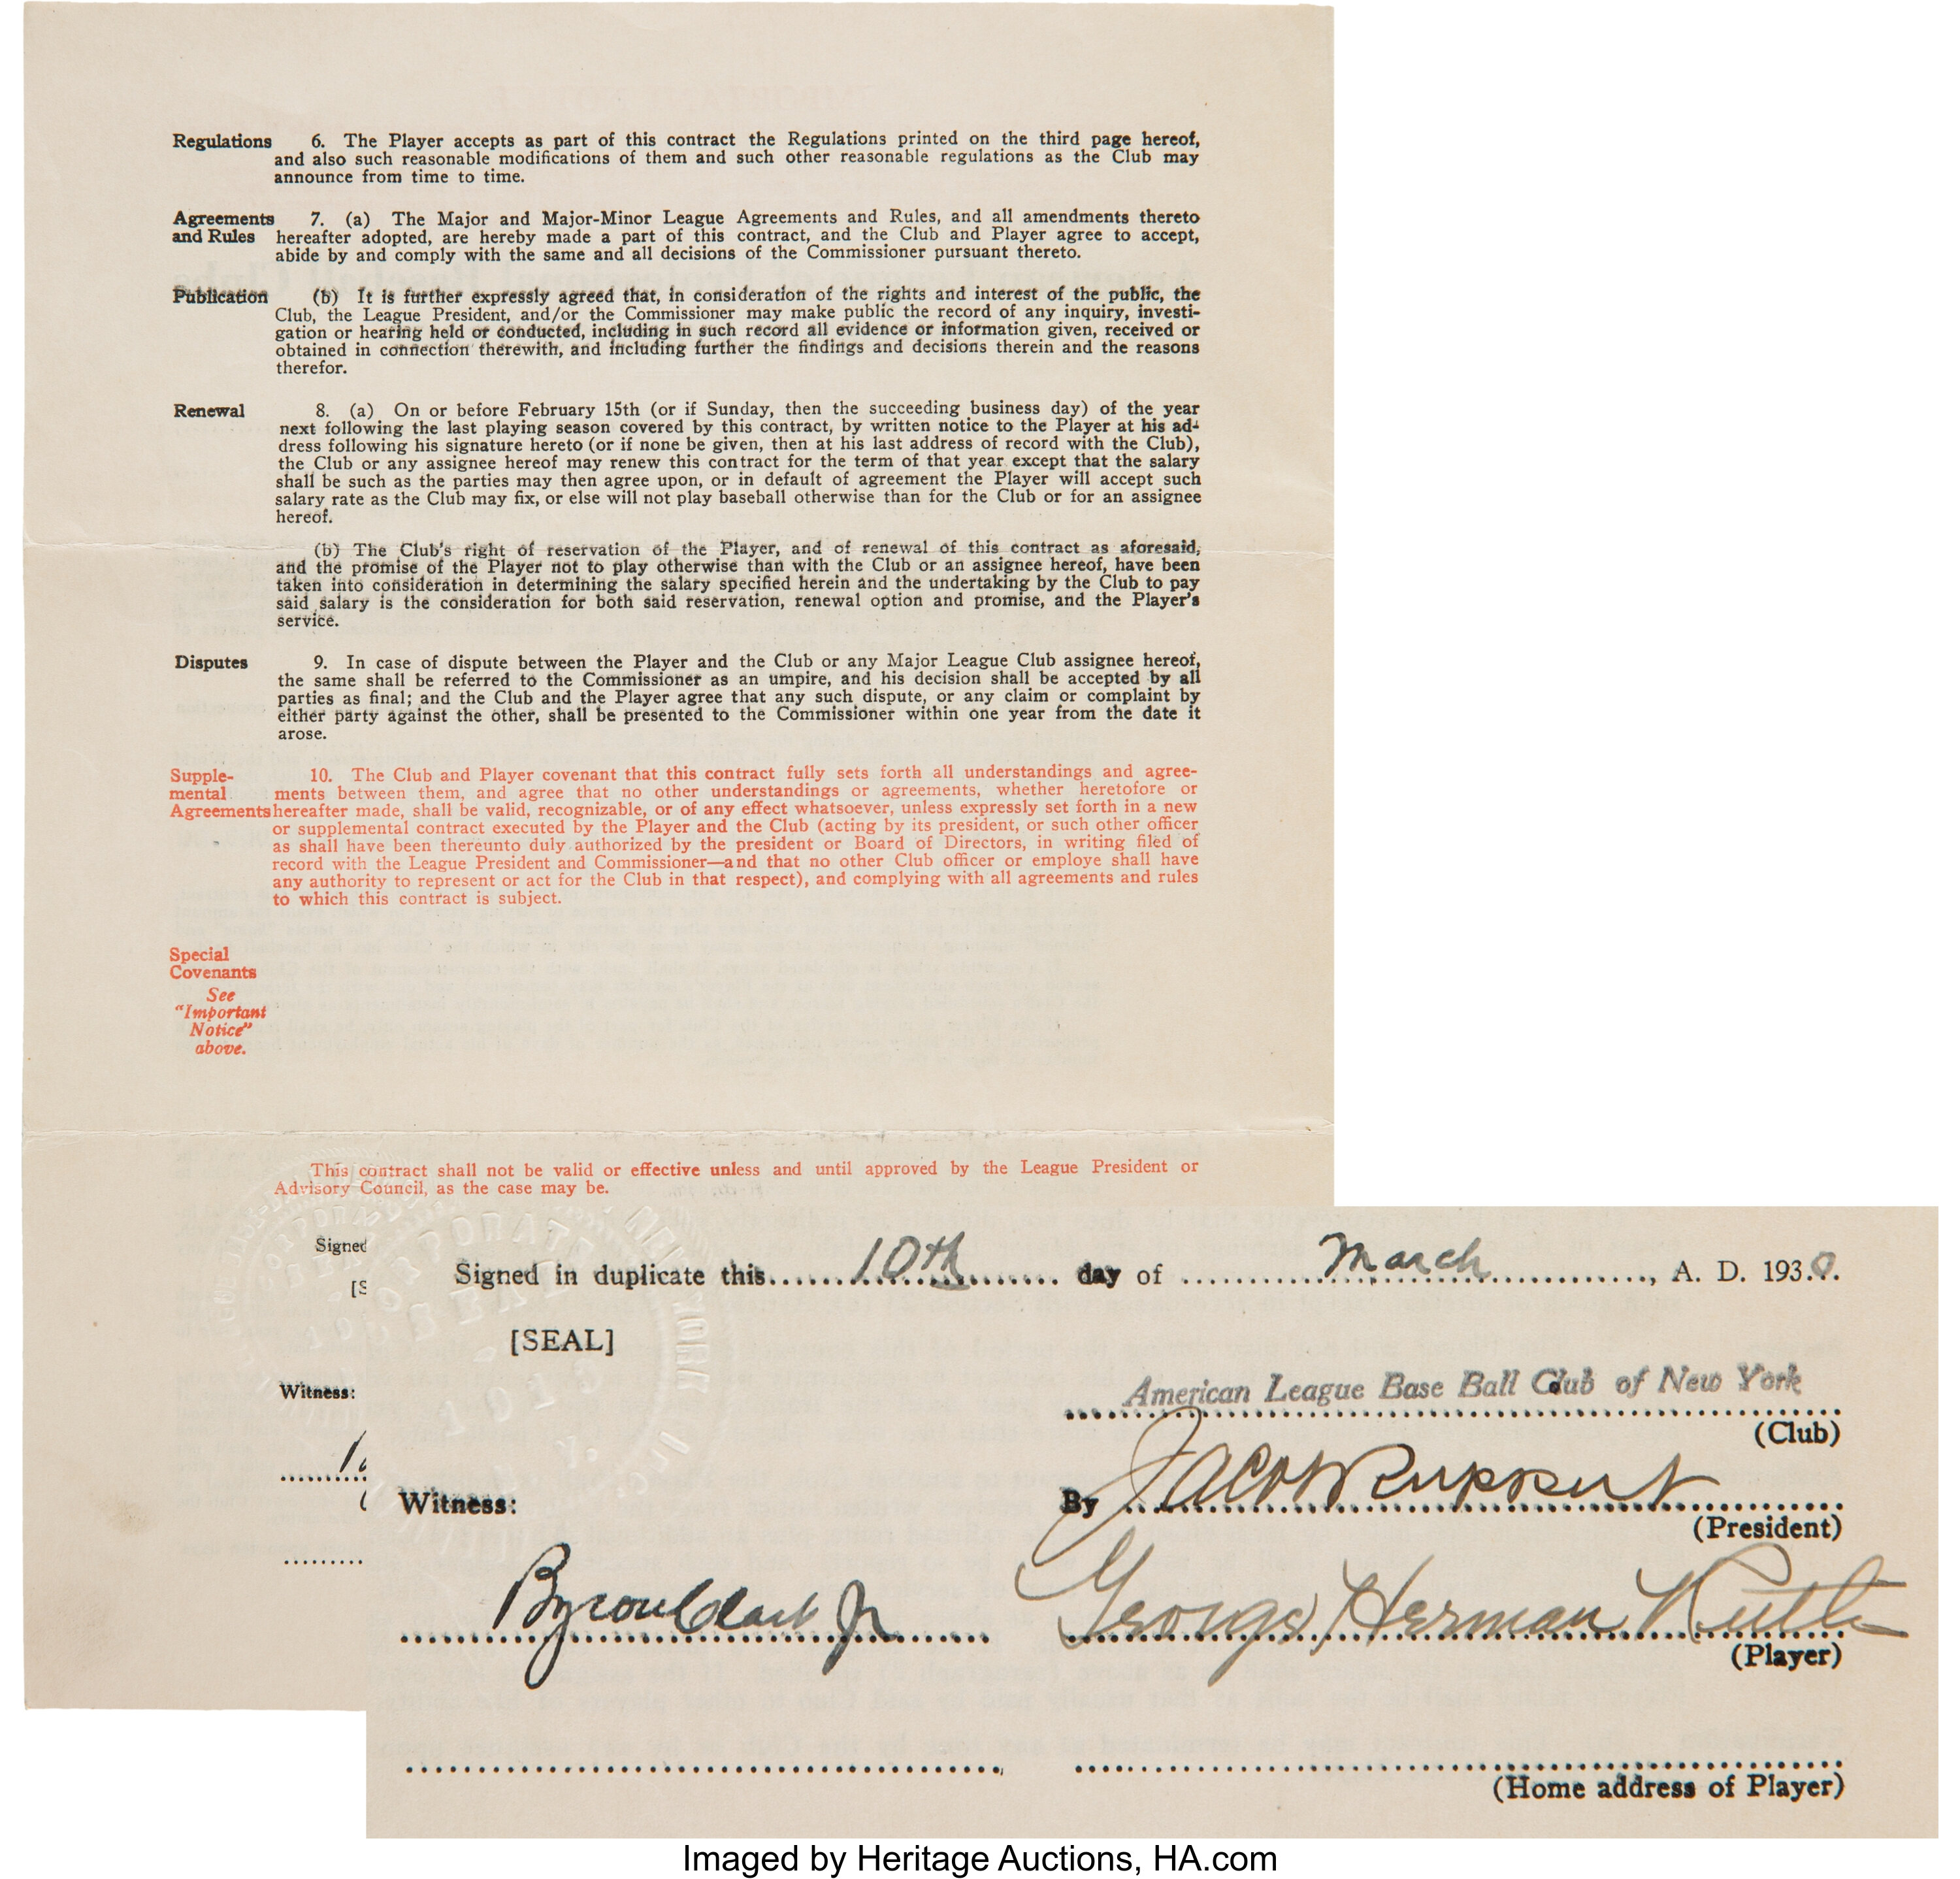 Babe Ruth's 1932 contract with the Yankees sells for nearly $300,000